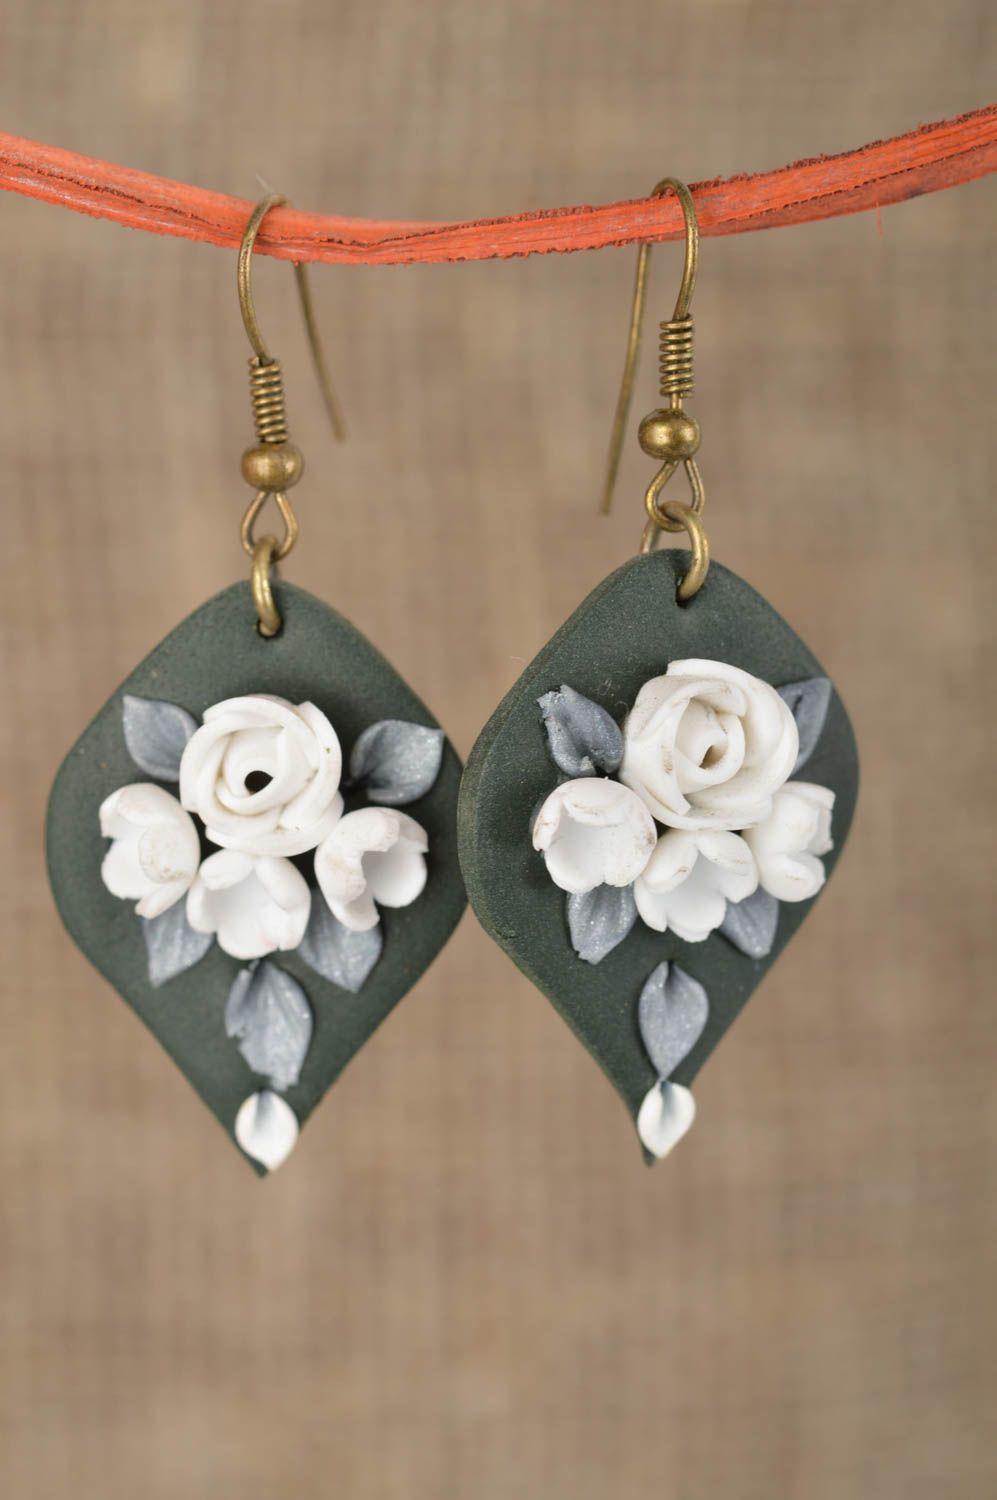 Polymer clay handmade stylish earrings with flowers designer summer accessory photo 1